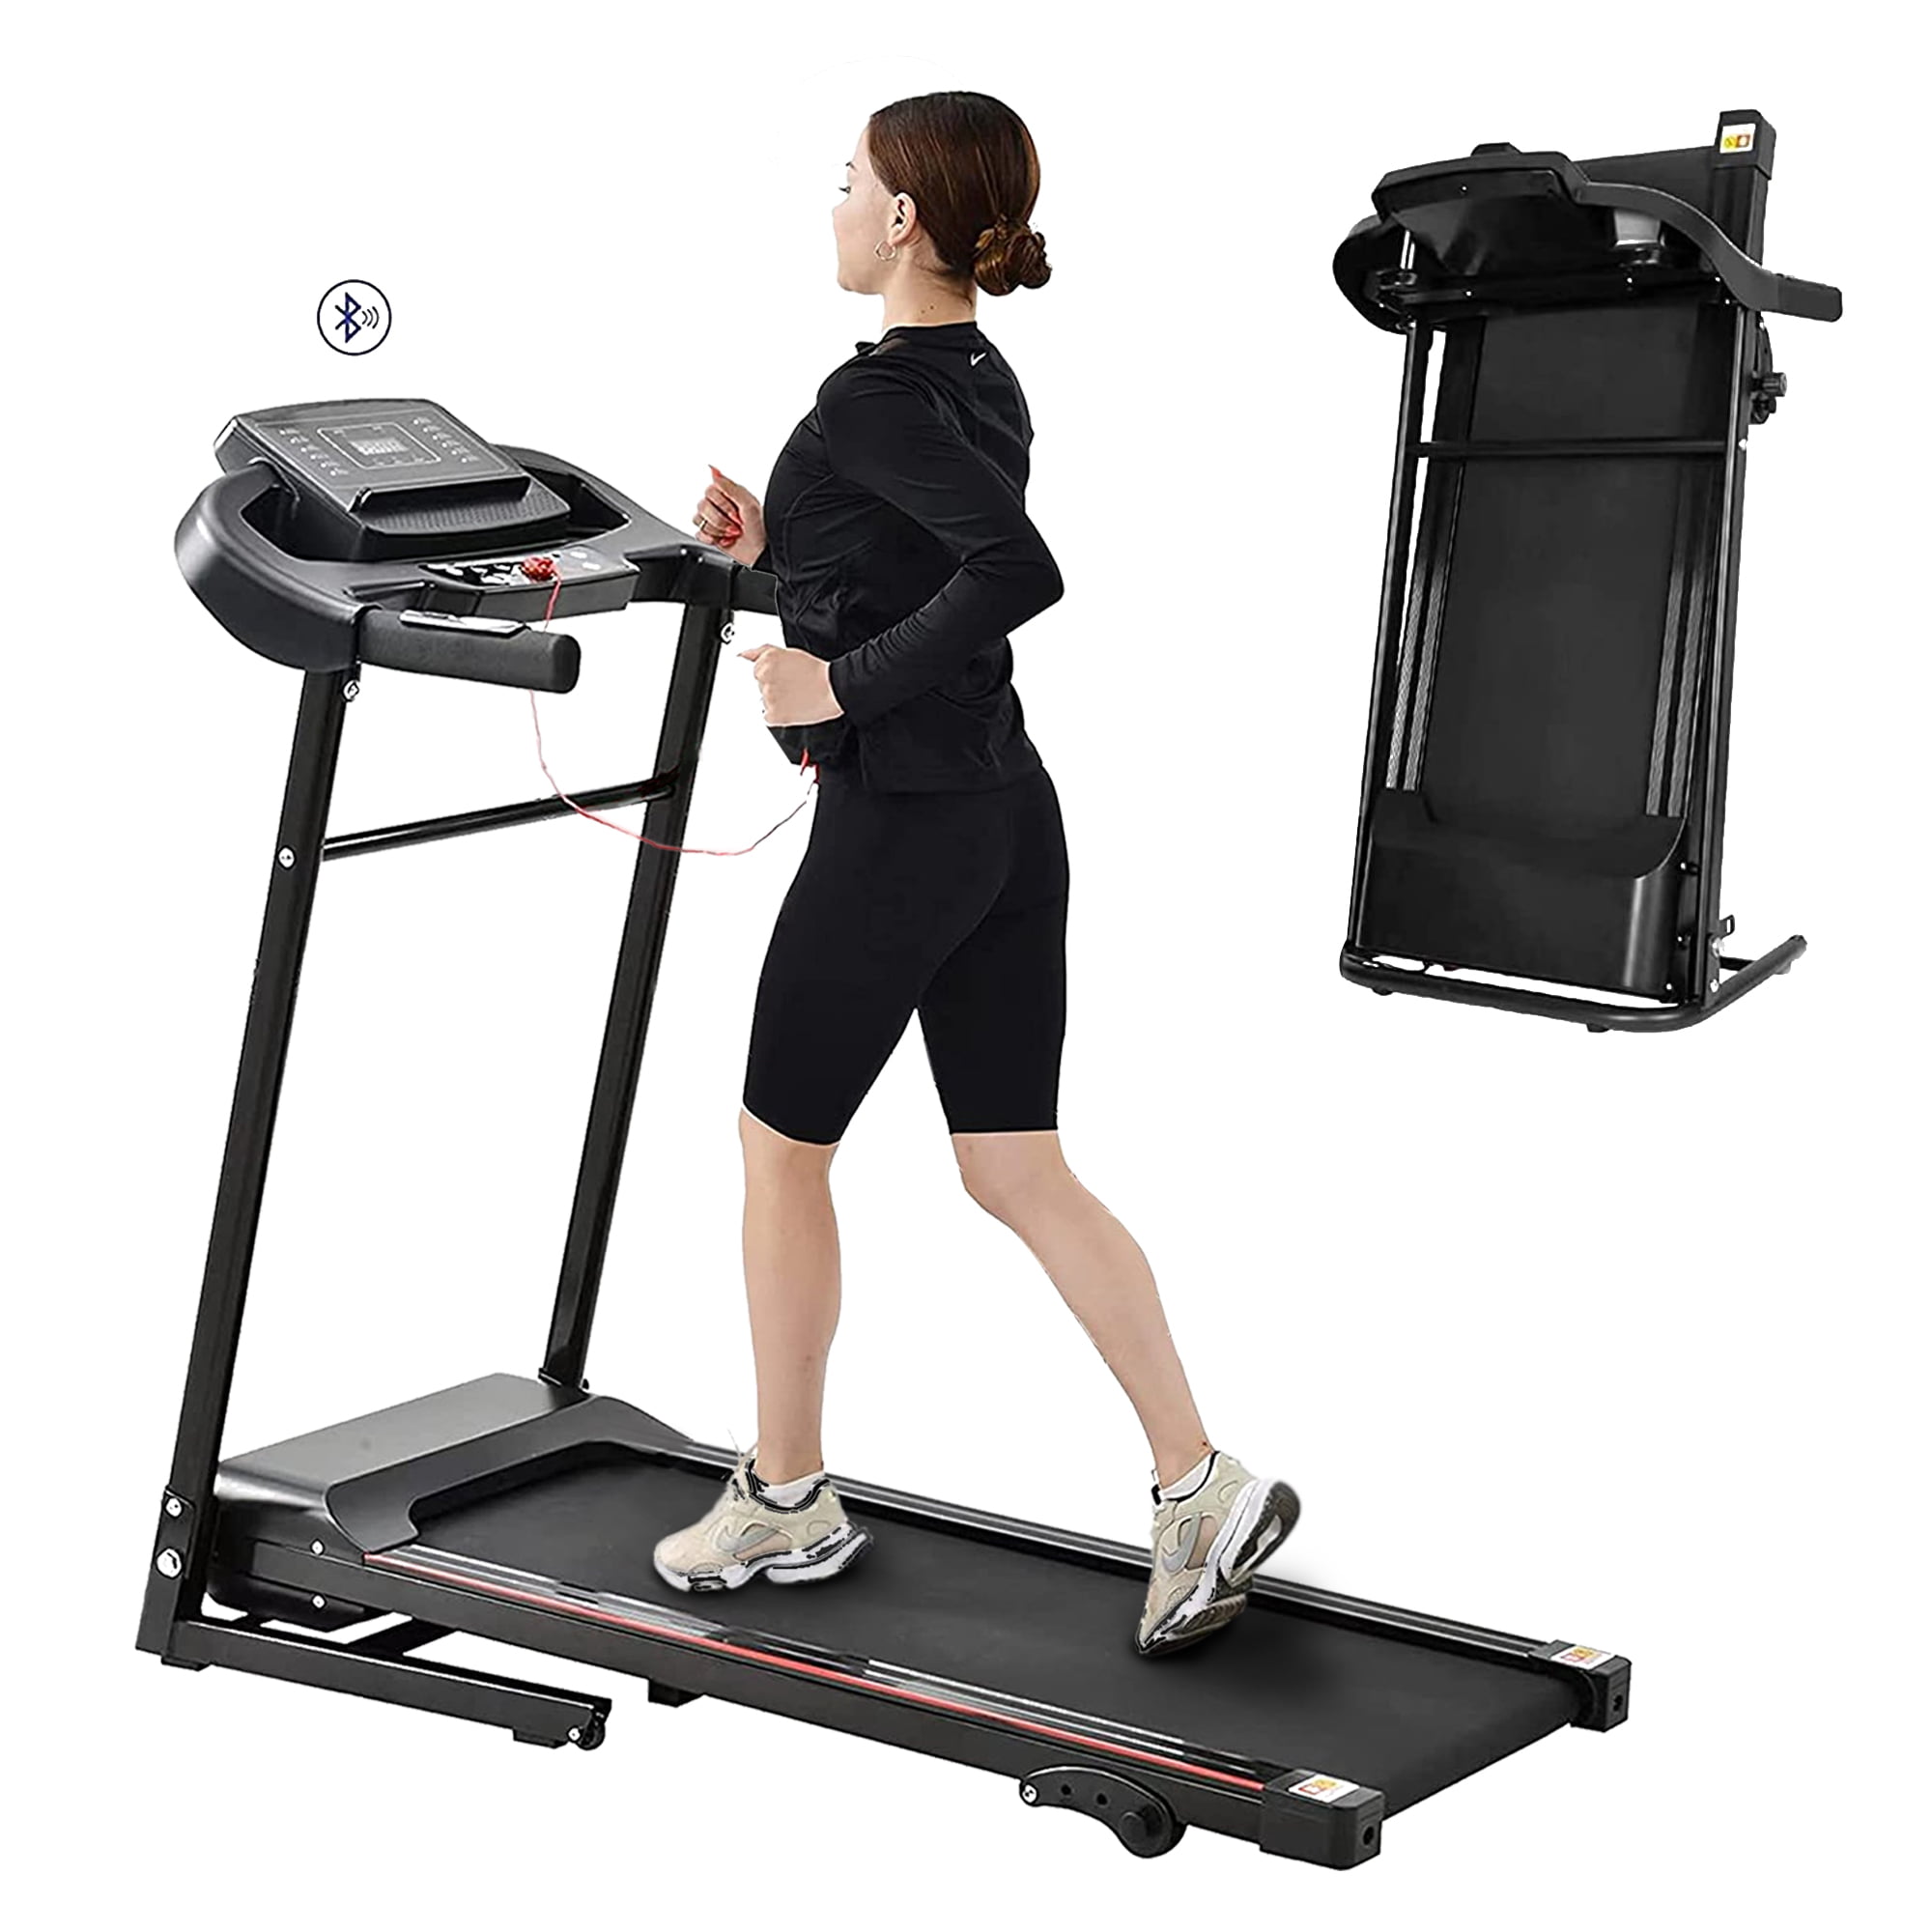 YY 2.5HP Folding Electric Treadmill with 3 Manual Incline Running Machine for Home Jogging Running Walking 7.5MPH with 3 Modes | MP3 Player | 12 Programs | LCD Display |Traceable Dat,Black,JK913